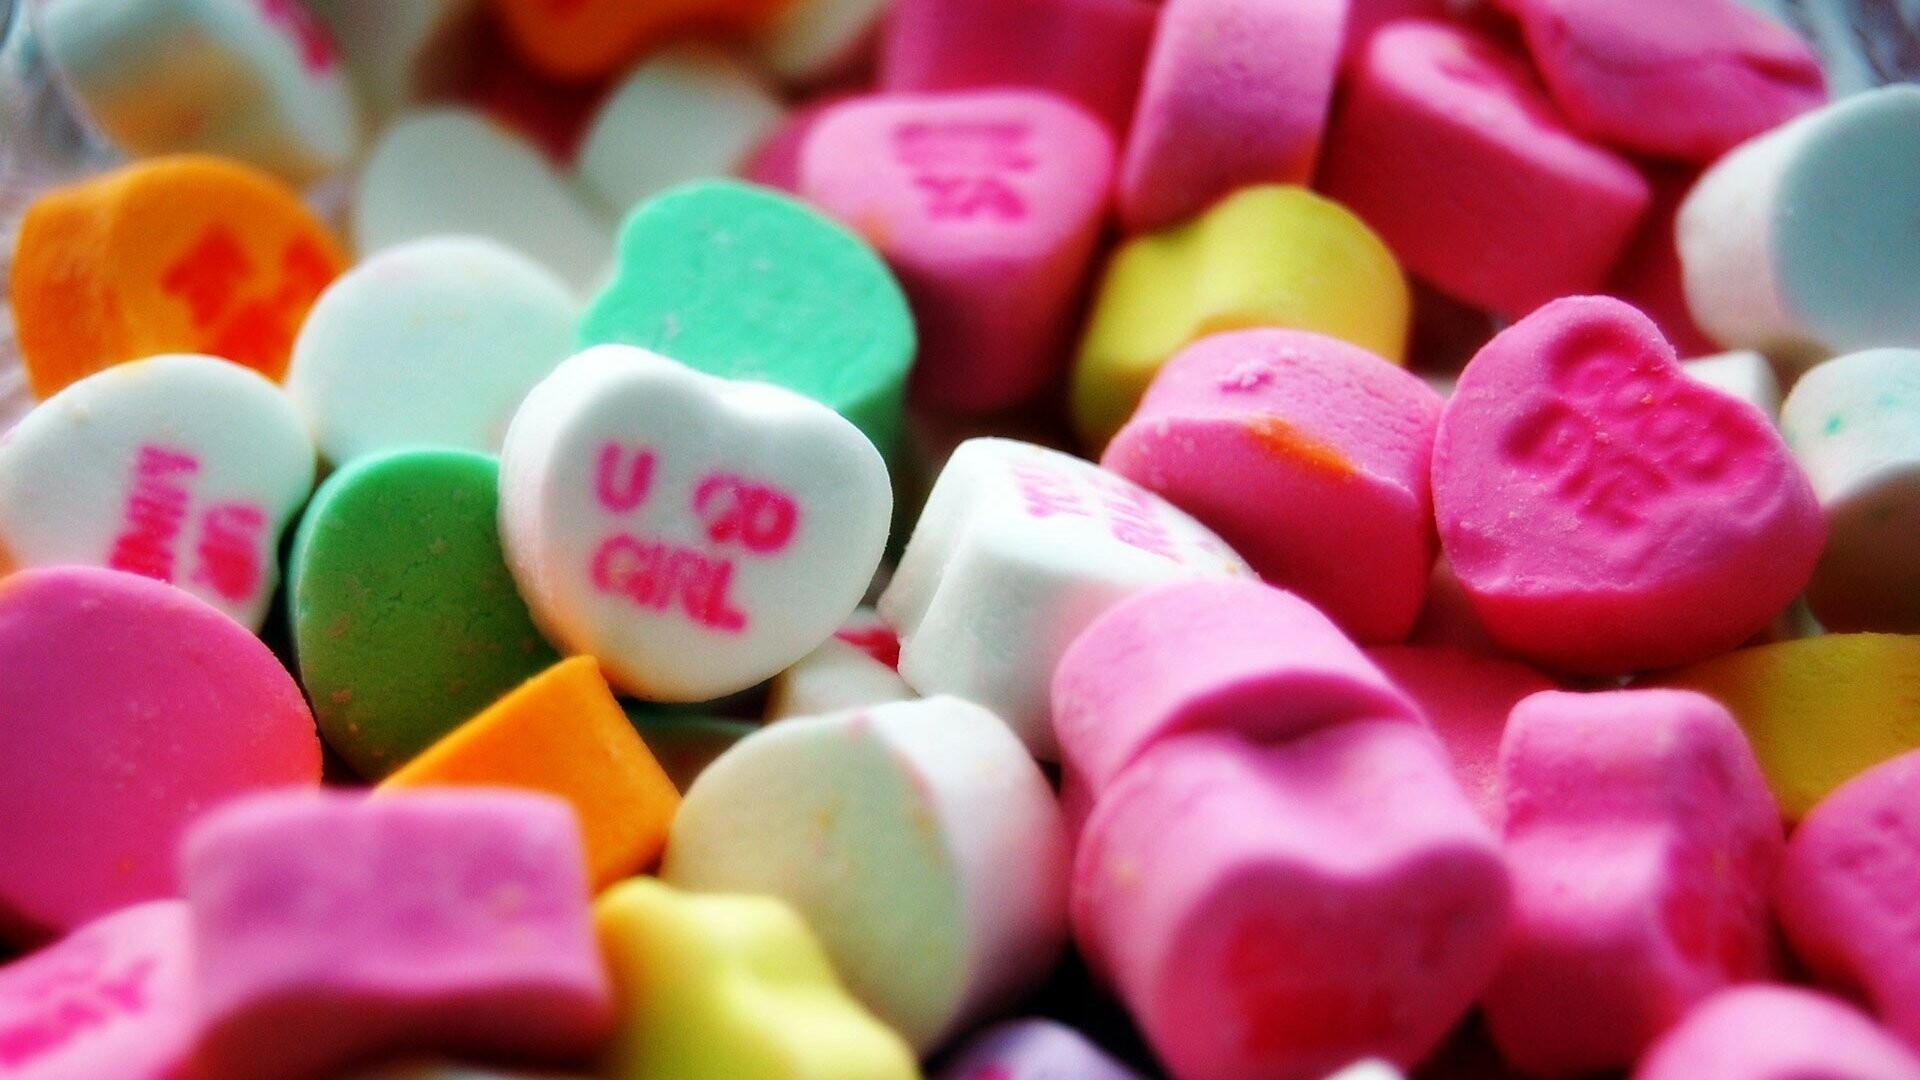 Sweets: Sweethearts candies, Tiny heart-shaped confections with embossed endearments. 1920x1080 Full HD Wallpaper.